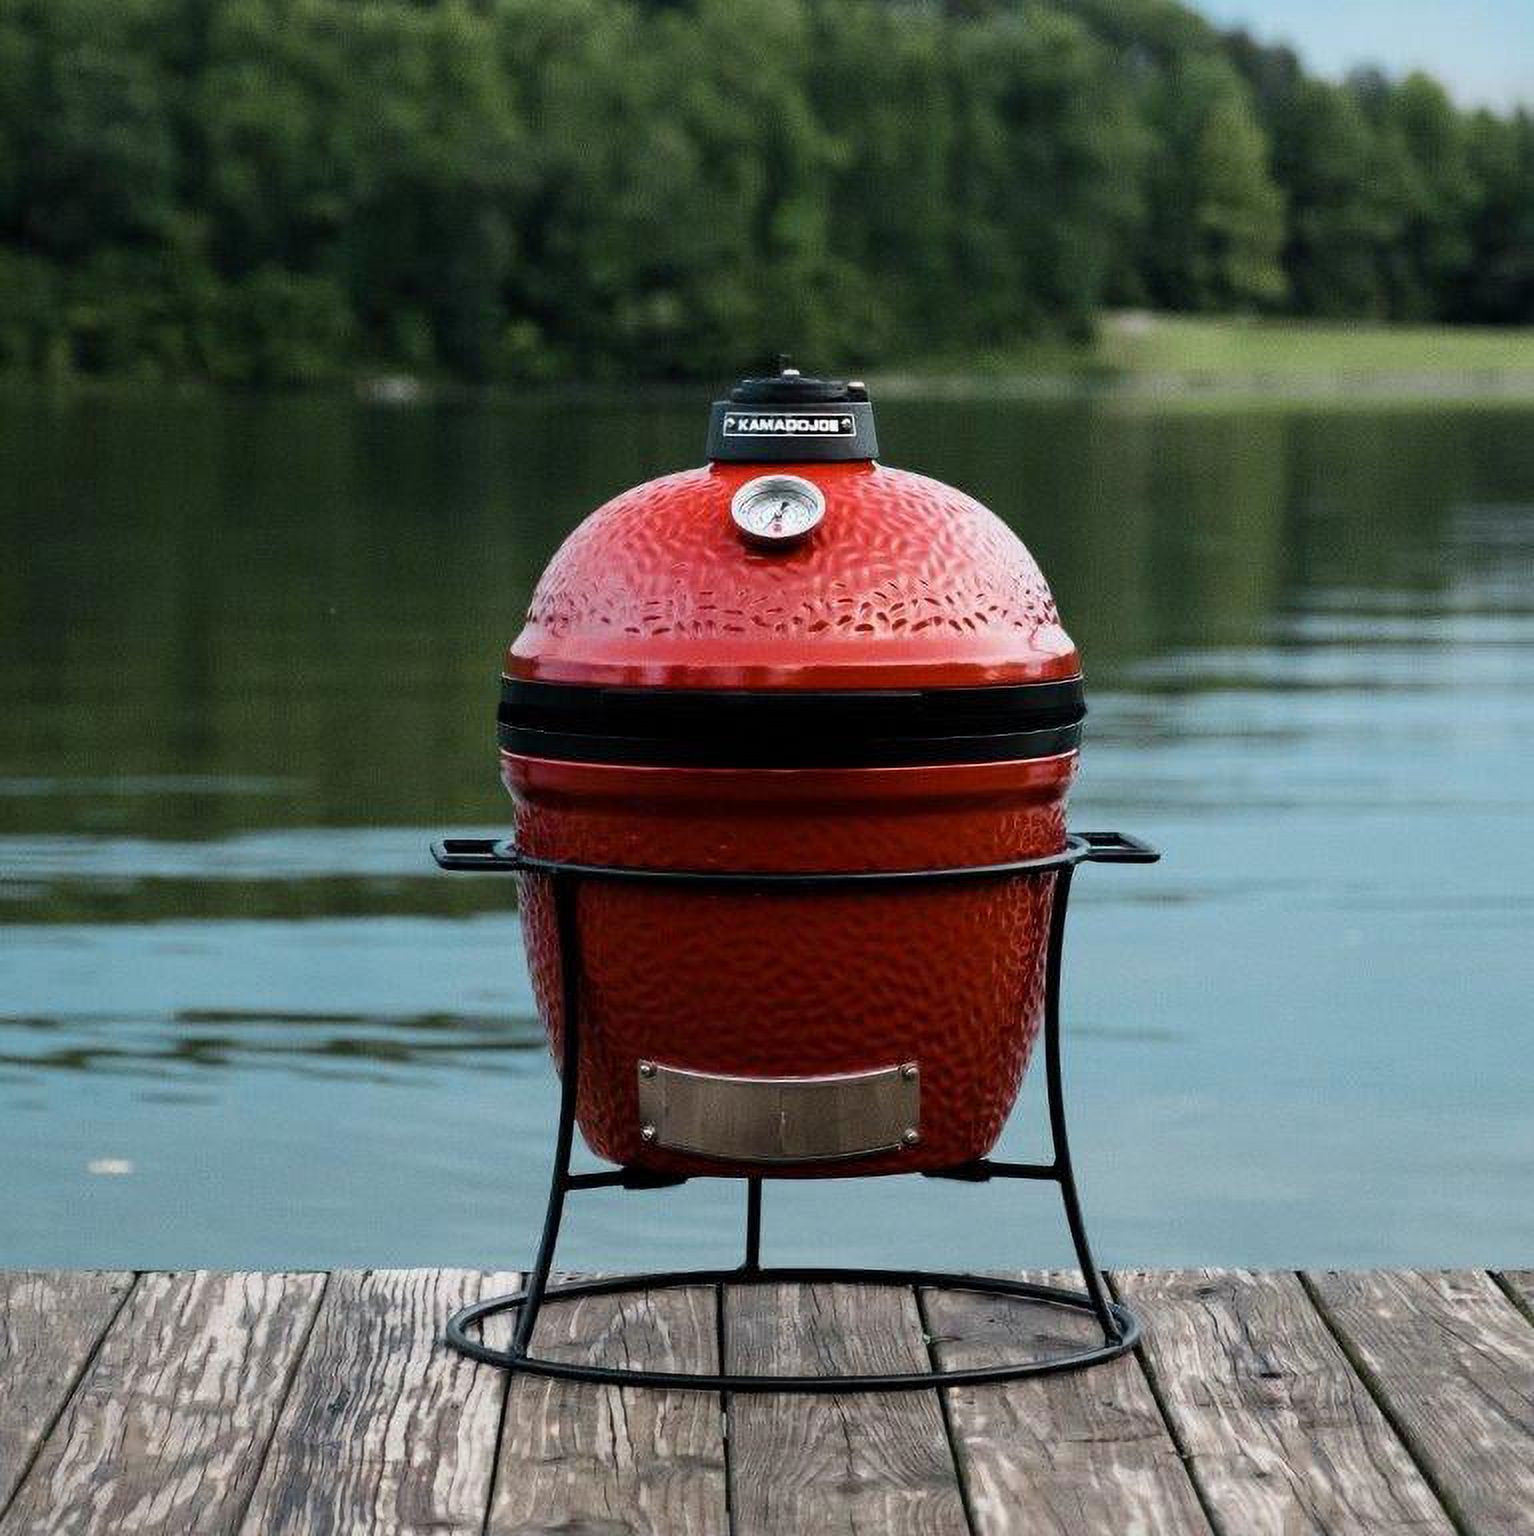 Joe Jr. 13.5 in. Portable Charcoal Grill in Red with Cast Iron Cart, Heat Deflectors and Ash Tool - image 3 of 11